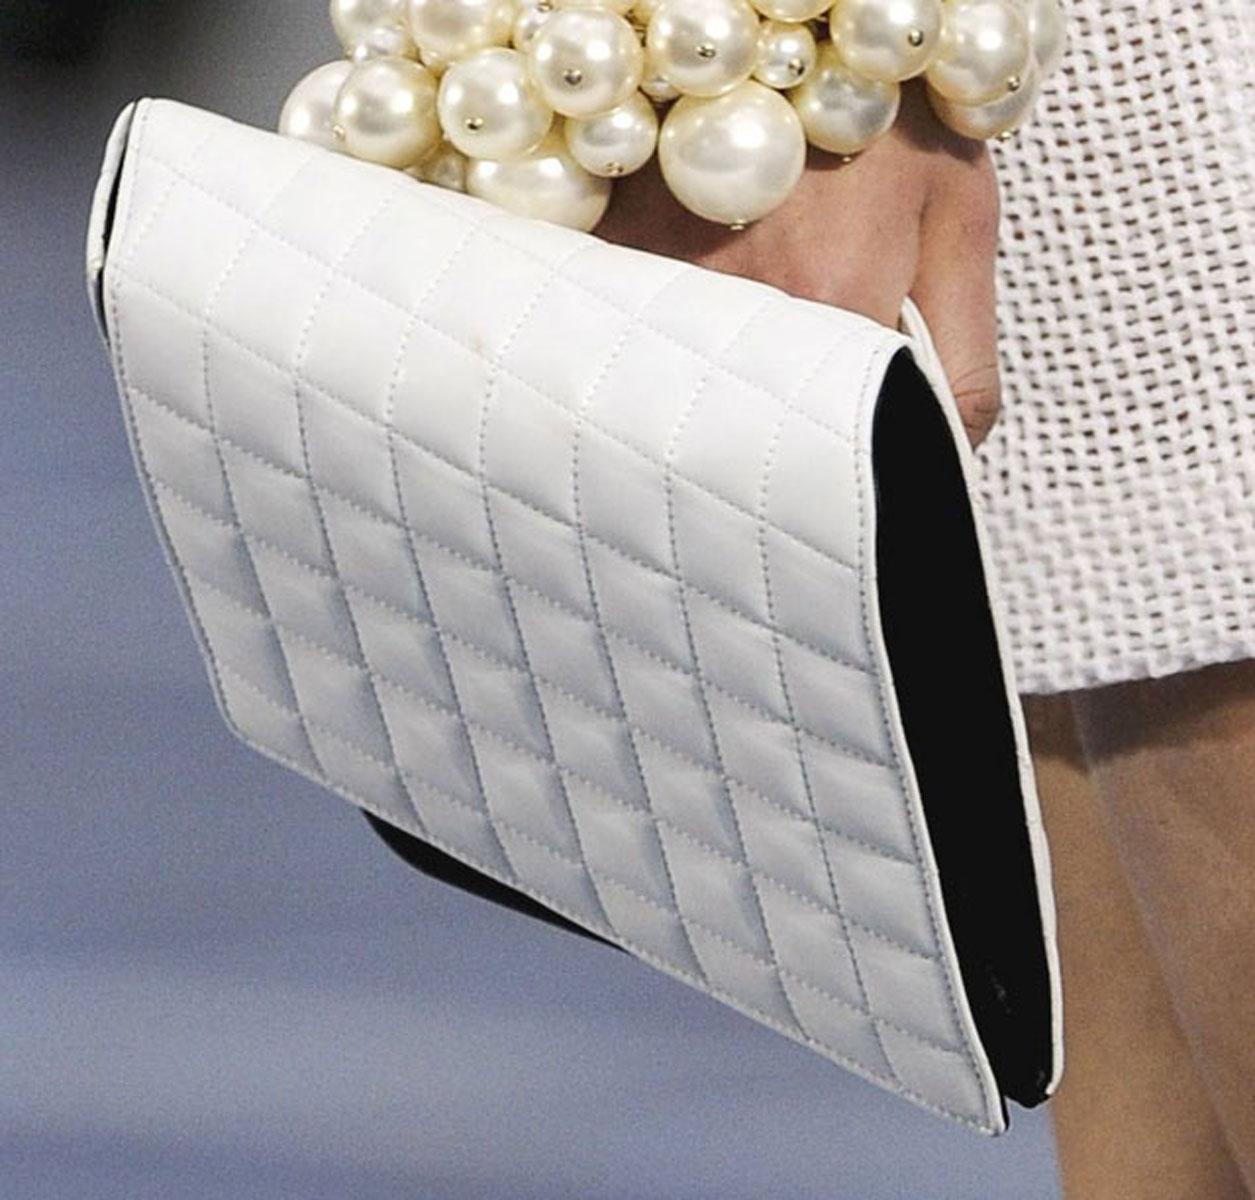 Chanel 2013 Runway Hand Through White Quilted Lambskin Clutch Bag In Good Condition For Sale In Miami, FL